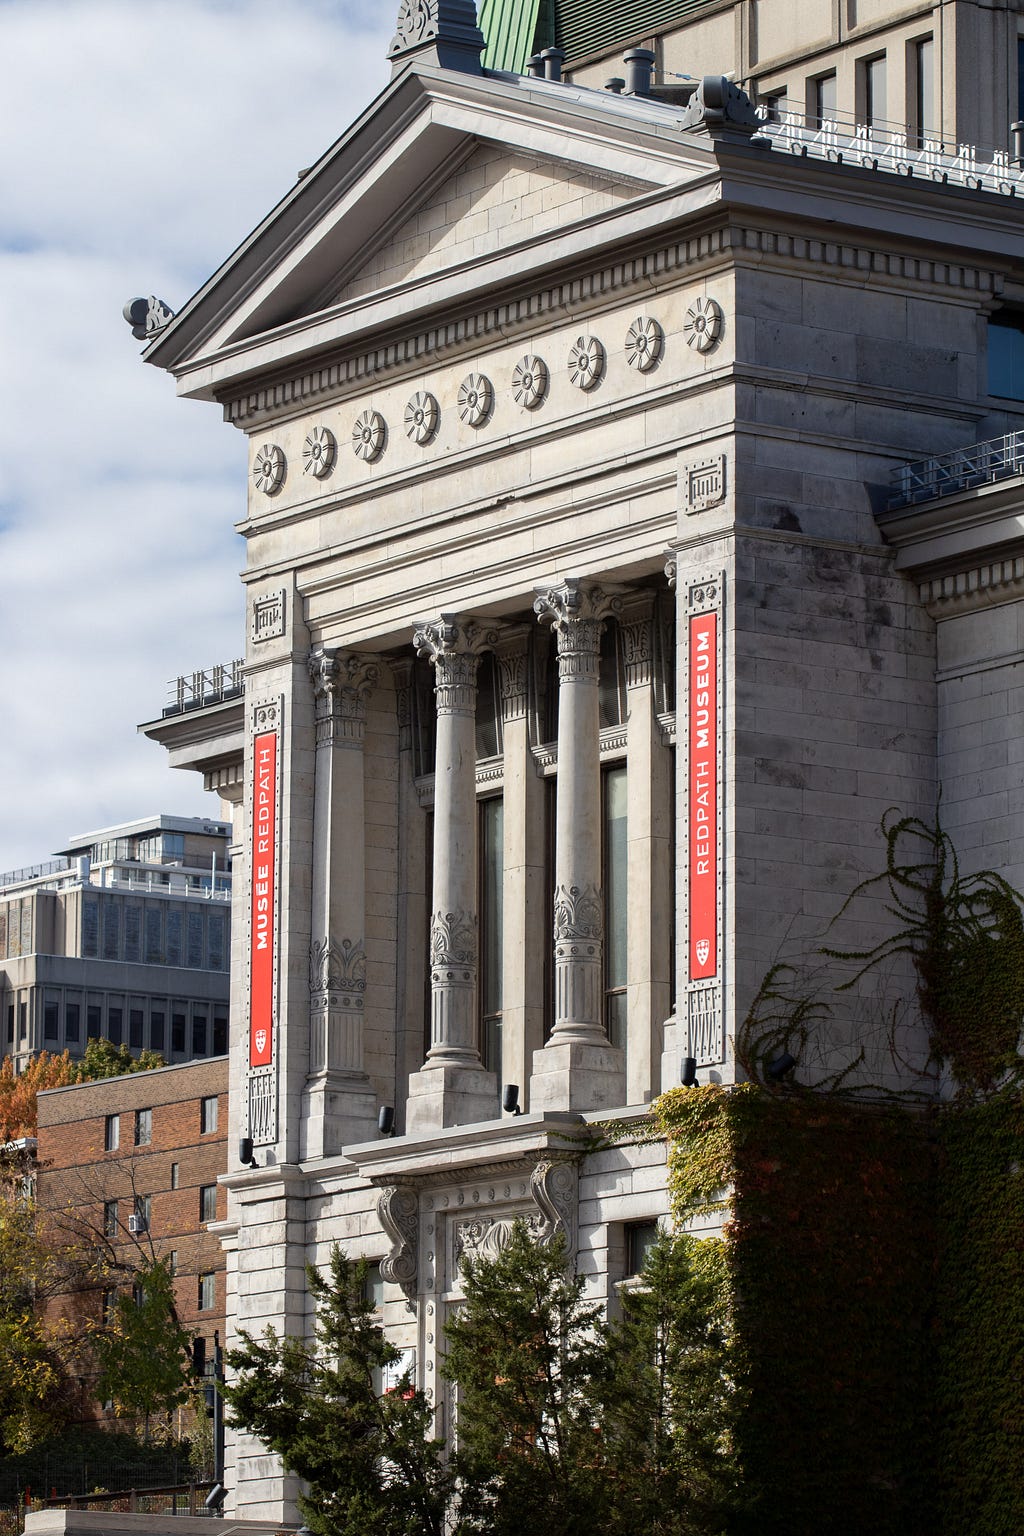 A view of the entrance to the Redpath Museum on the McGill Campus